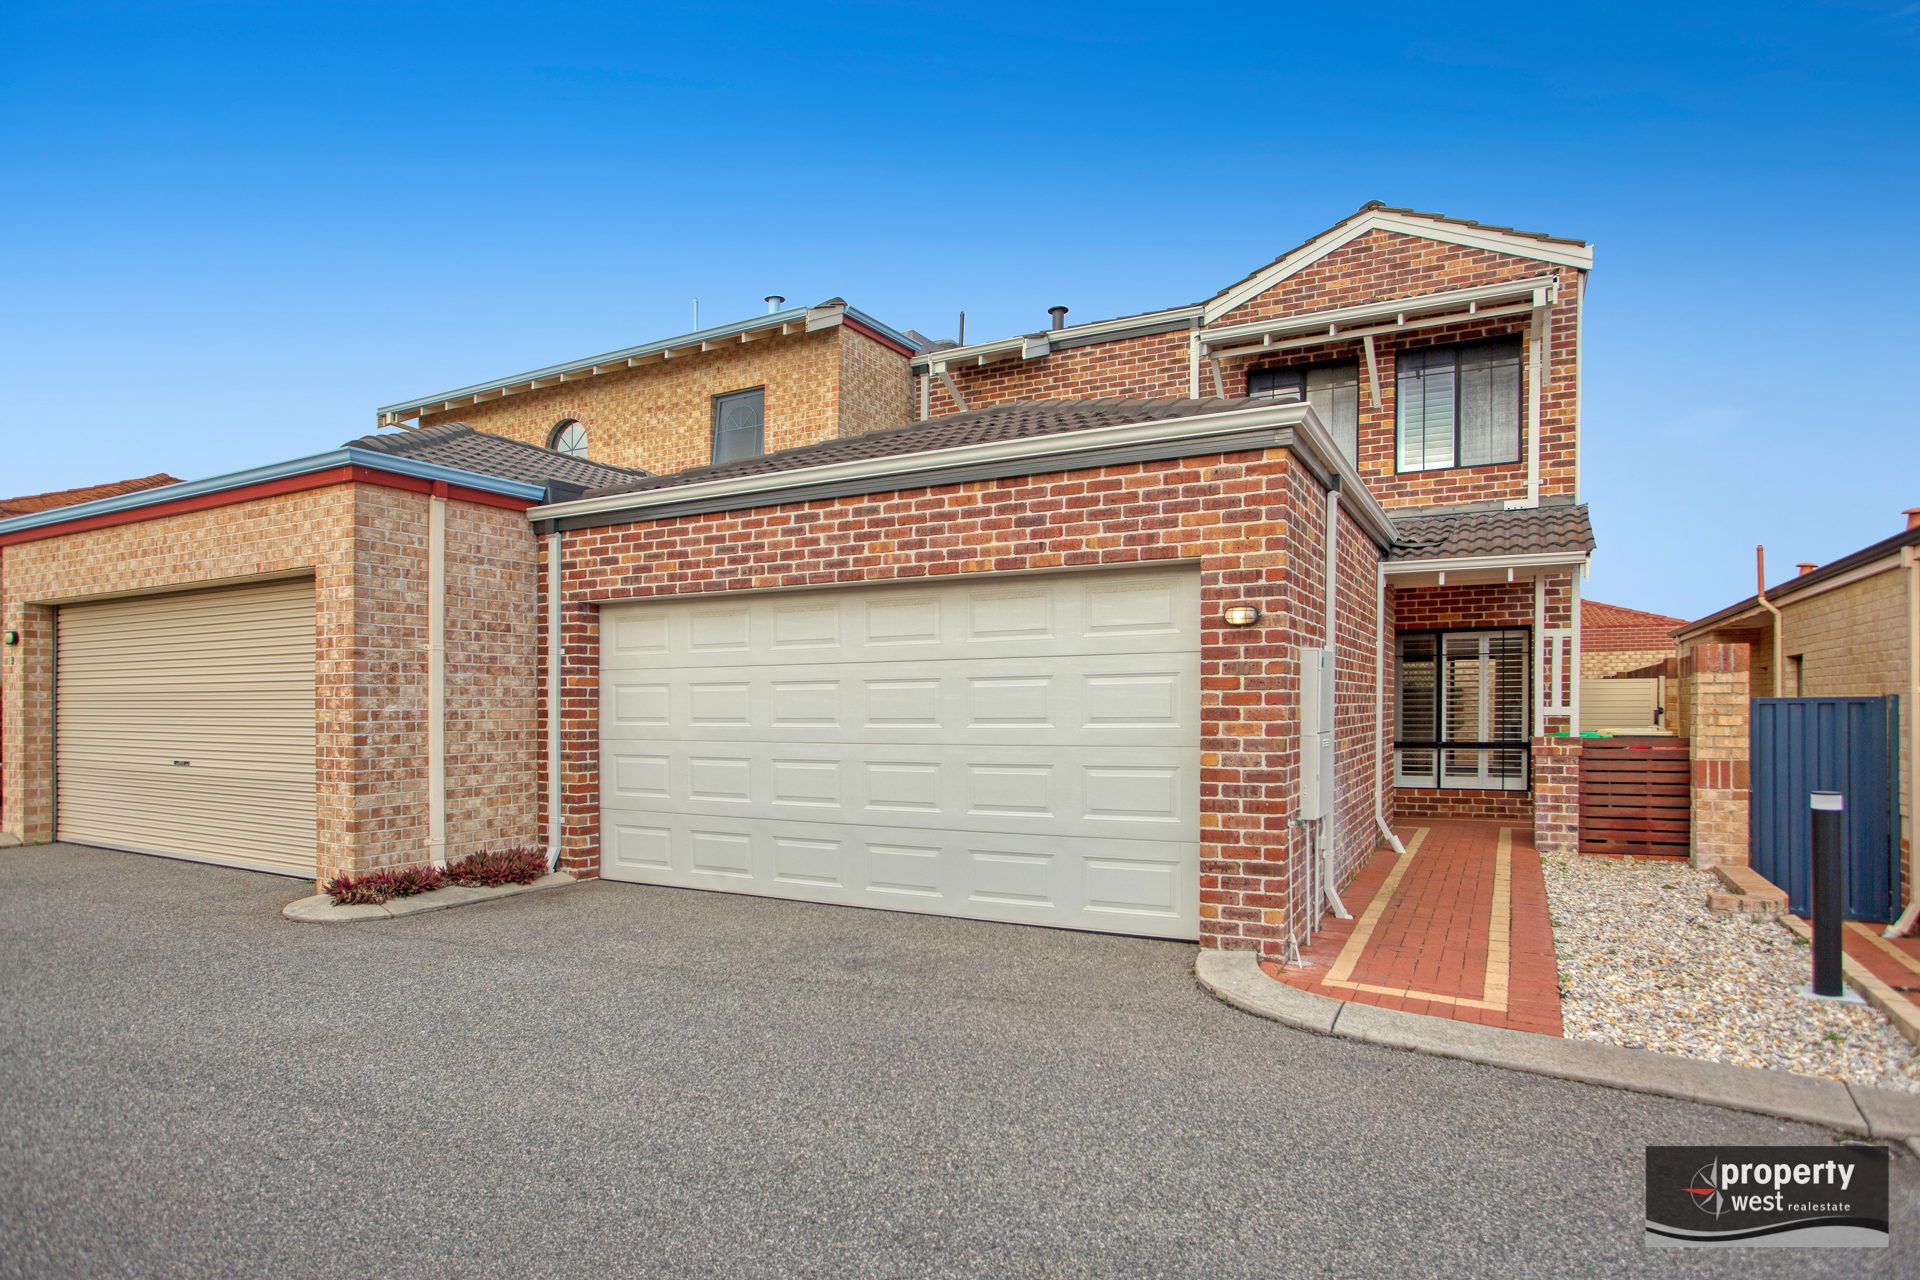 BEAUTIFUL HOME IN SECURE GATED COMMUNITY - SIX (6) MONTH LEASE AGREEMENT